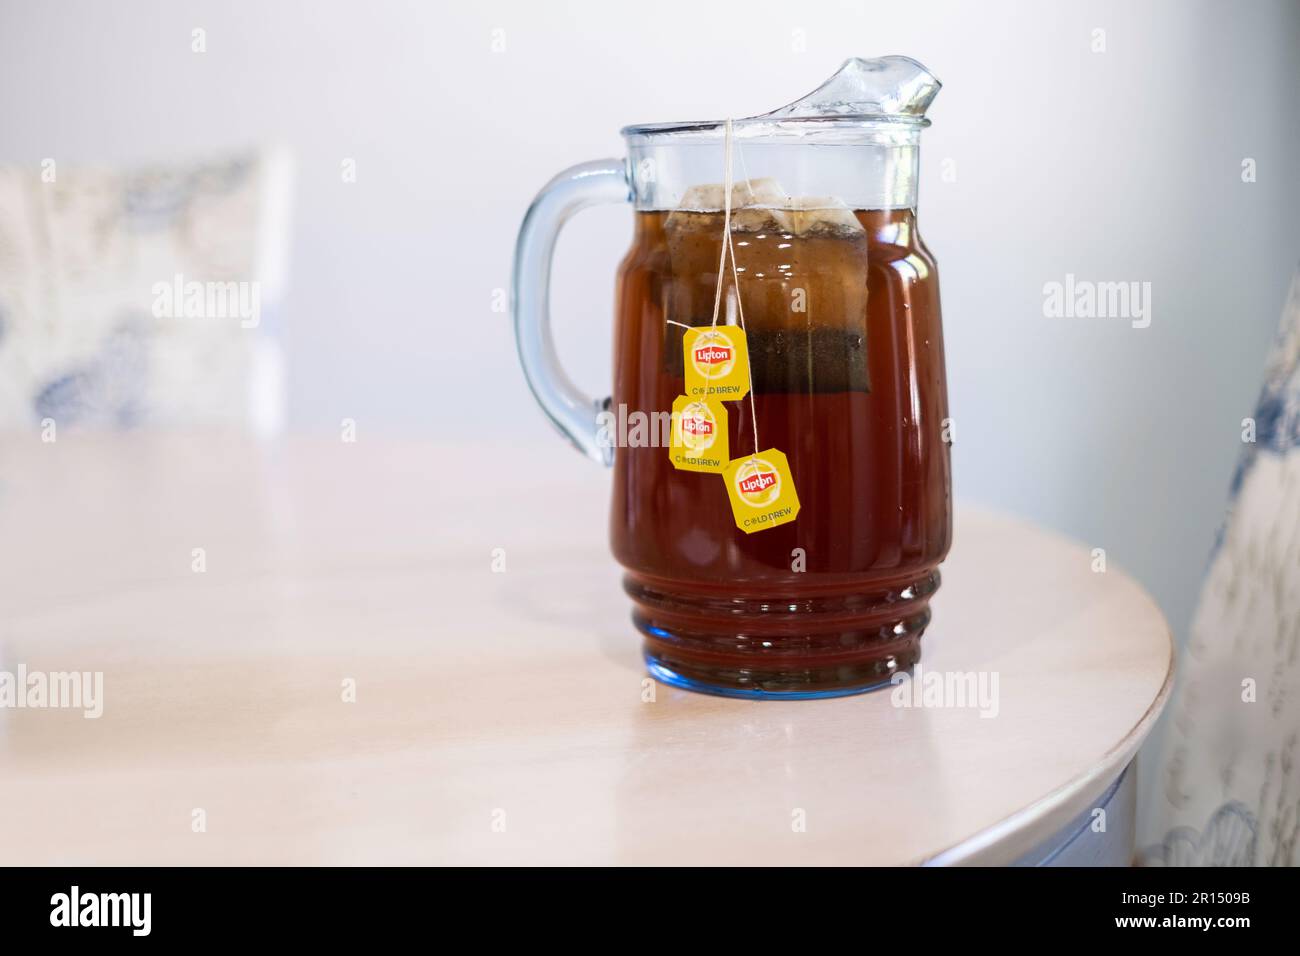 https://c8.alamy.com/comp/2R1509B/glass-pitcher-with-liptons-cold-brew-family-size-teabags-making-tea-in-cold-water-usa-2R1509B.jpg